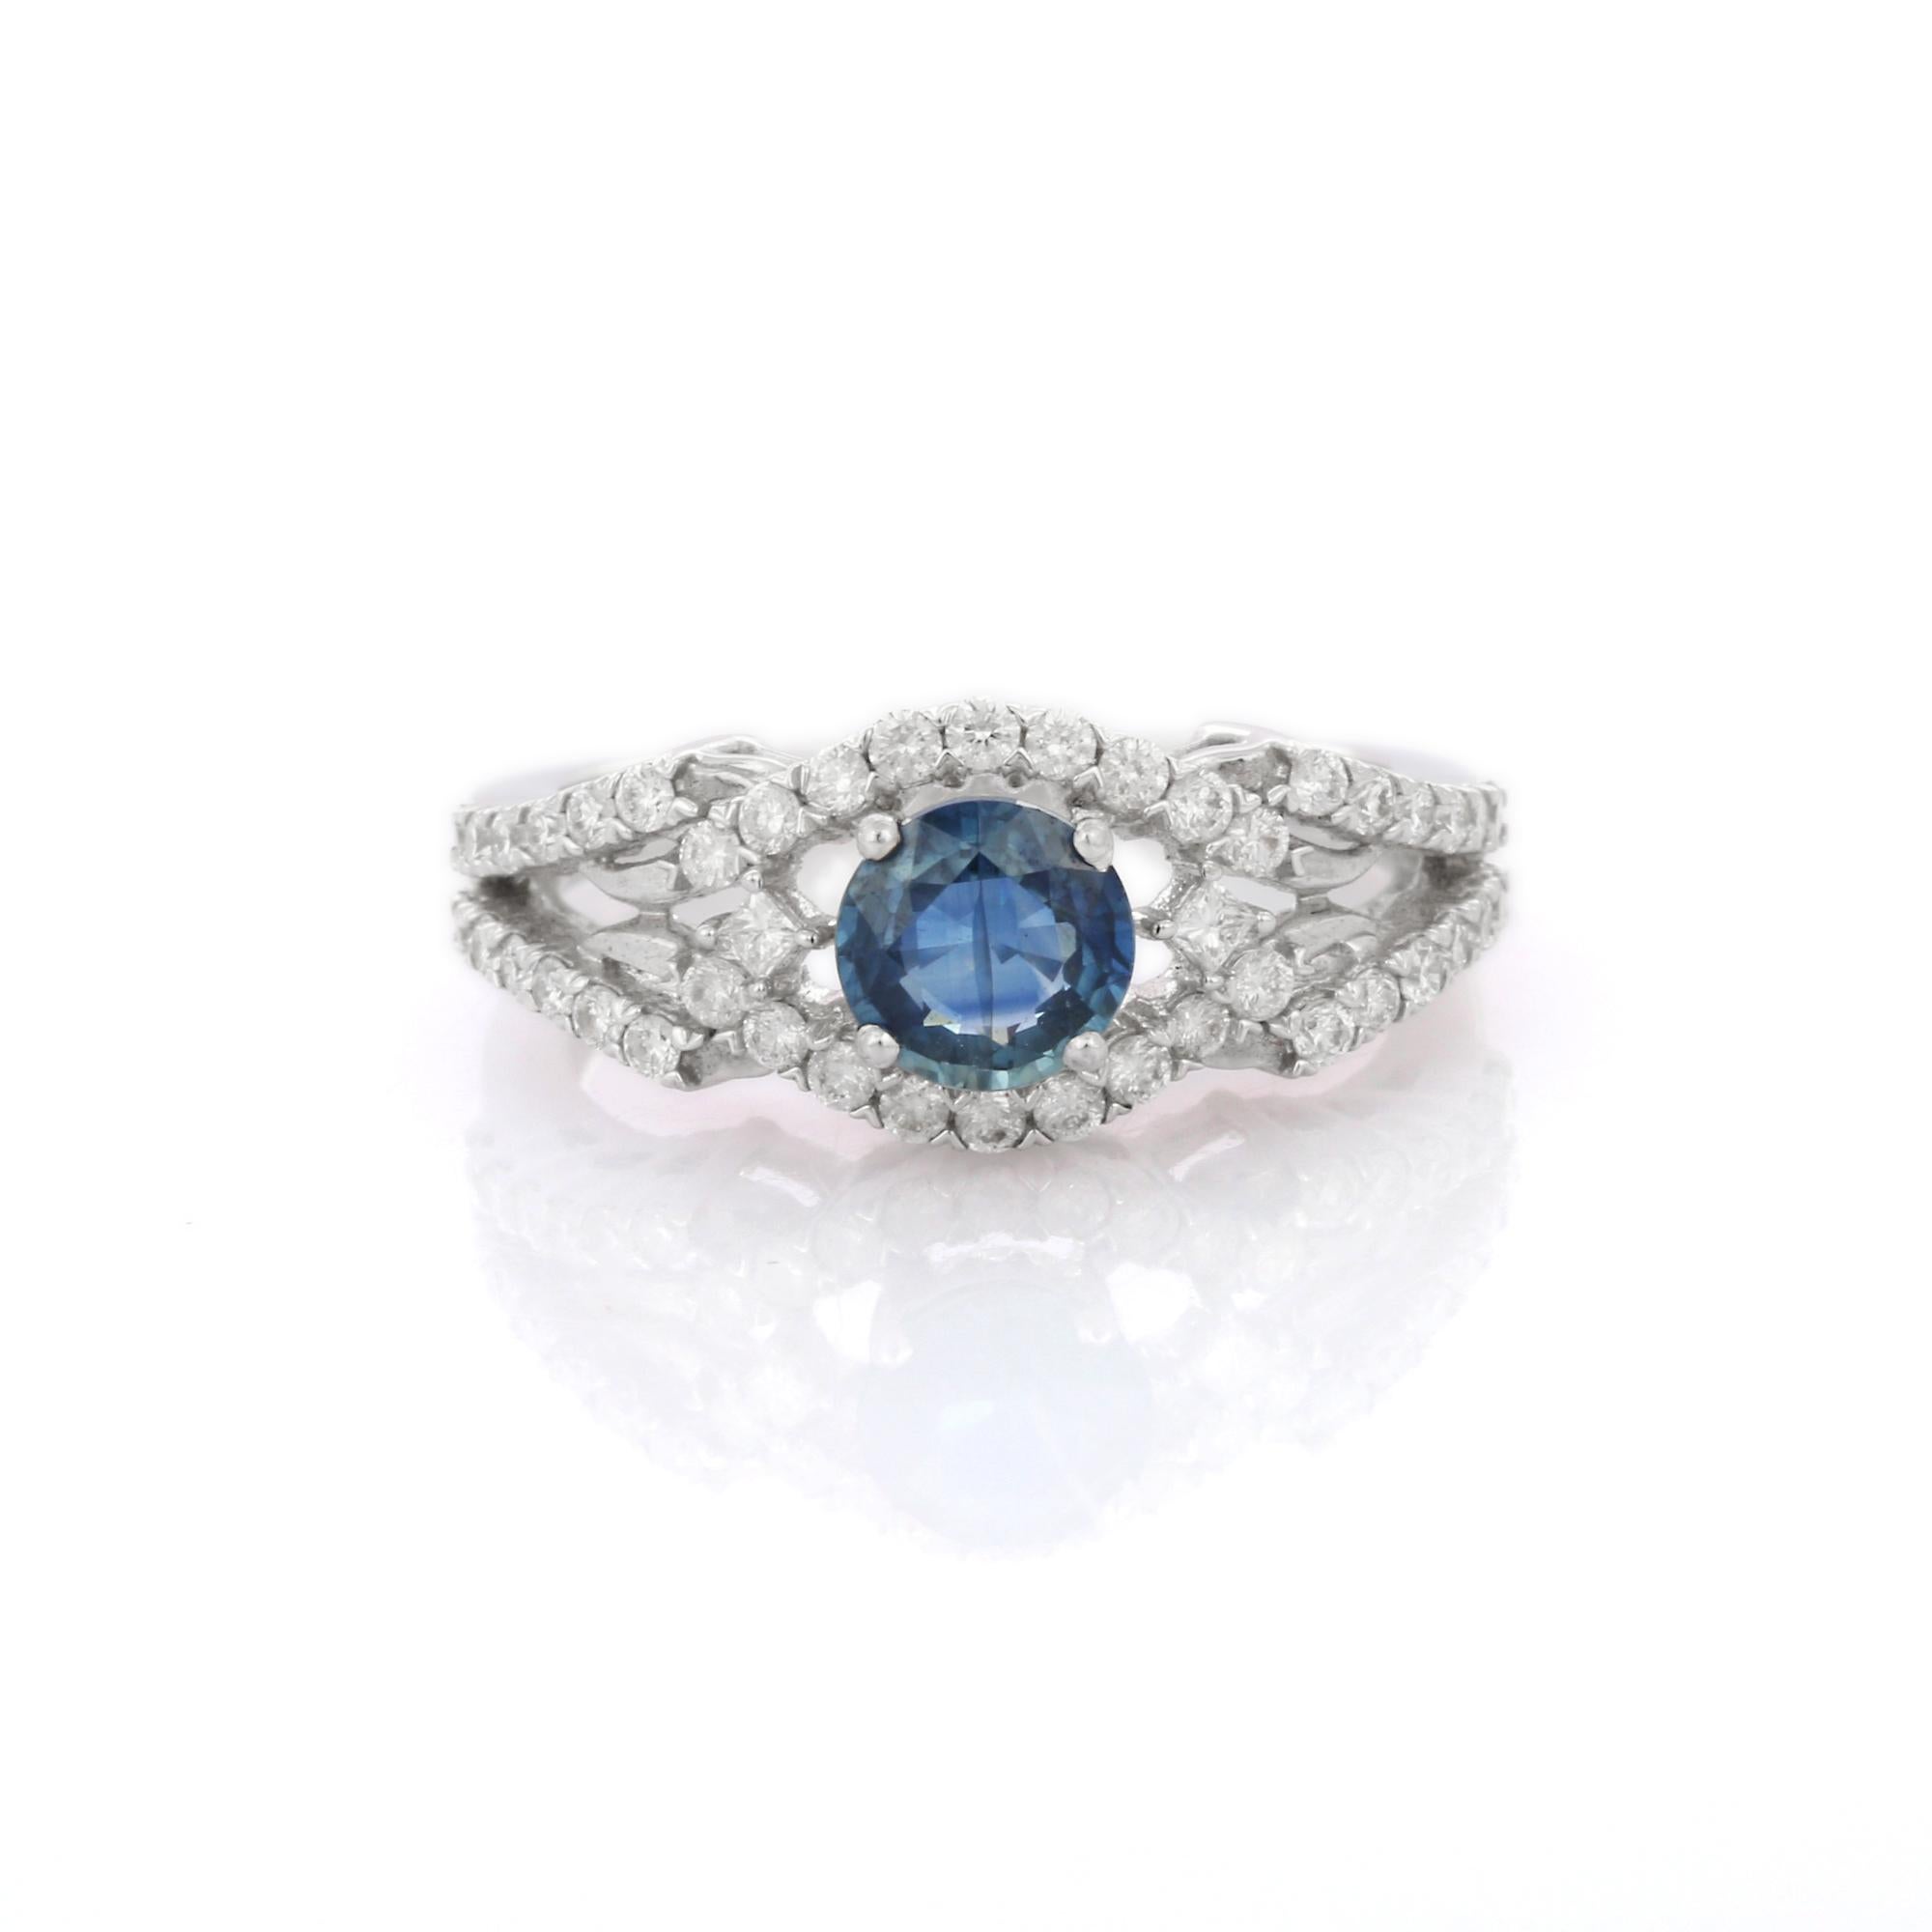 For Sale:  18K White Gold Regal 0.88ct Round Cut Sapphire Diamond Engagement Ring  5